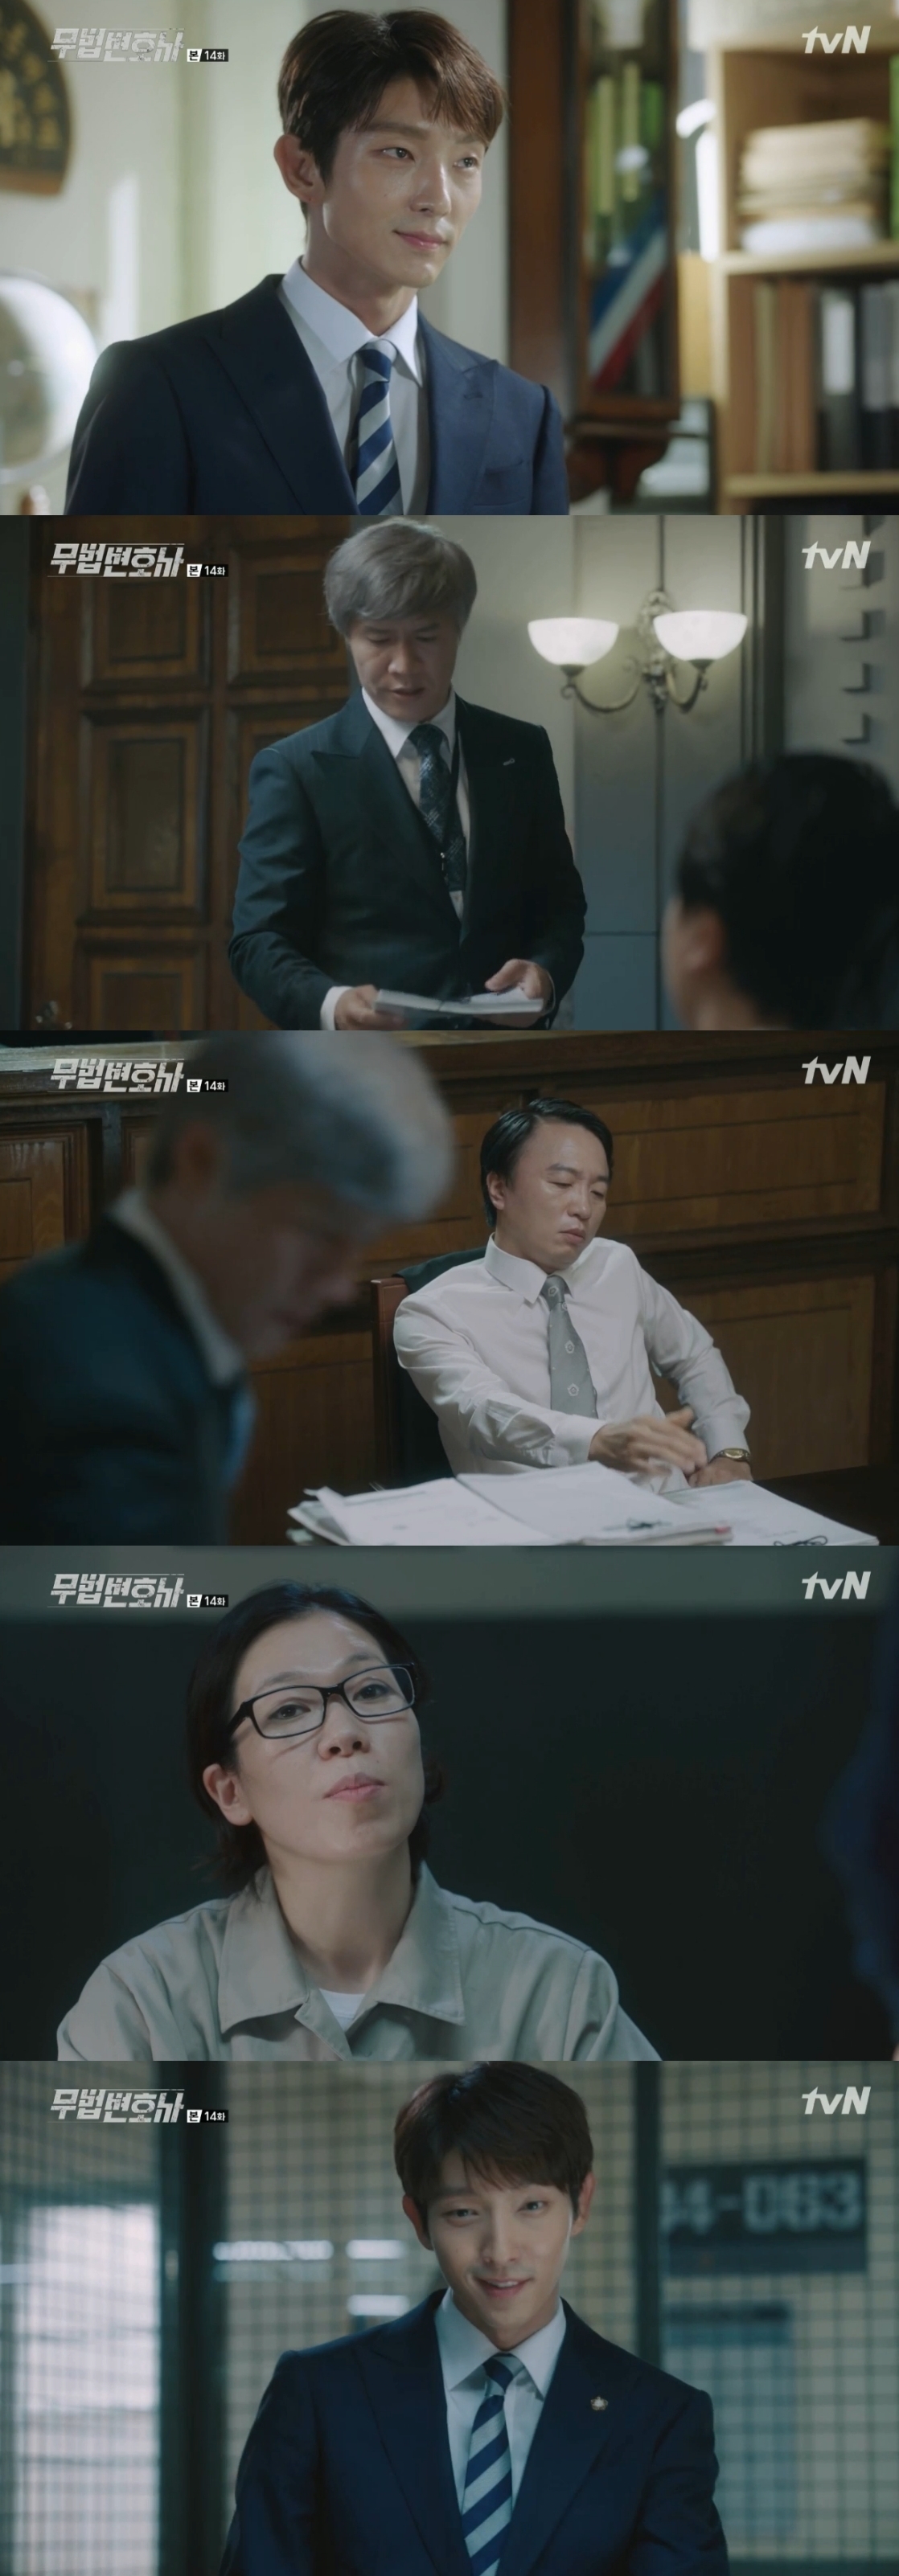 On TVN Lawless Lawyer, which was broadcasted at 9:15 pm on the 24th, Bong Sang-pil (Lee Joon-gi) was shown trying to catch Cha Moon-sook using Nam Soon-ja (Yum Hye-ran).On the same day, Bong visited his prosecutor, Park Ho-san, who asked, I heard there was video evidence. Did you get that from the chief prosecutor?Ha Jae-yi (Seo Ye-ji) said, Have you thought about where you got it? He made Cha suspect why Cha Moon-sook handed over important evidence to remove Nam Soon-ja.Then Bong met Nam Soon-ja, who said, Why did you come out after my interview? I came to deal with you.Bong Sang-pil said, I know that I have managed the account of Shin Yi Cha Moon-sook. Nam Soon-ja voiced that it has nothing to do with me.Is there anyone who knows better than me? The reason behind all these cases is Judge Cha Moon-sook. Nam Soon-ja was not shaken.Bong Sang-pil said, Think about what happened to the worlds An-o-ju now.